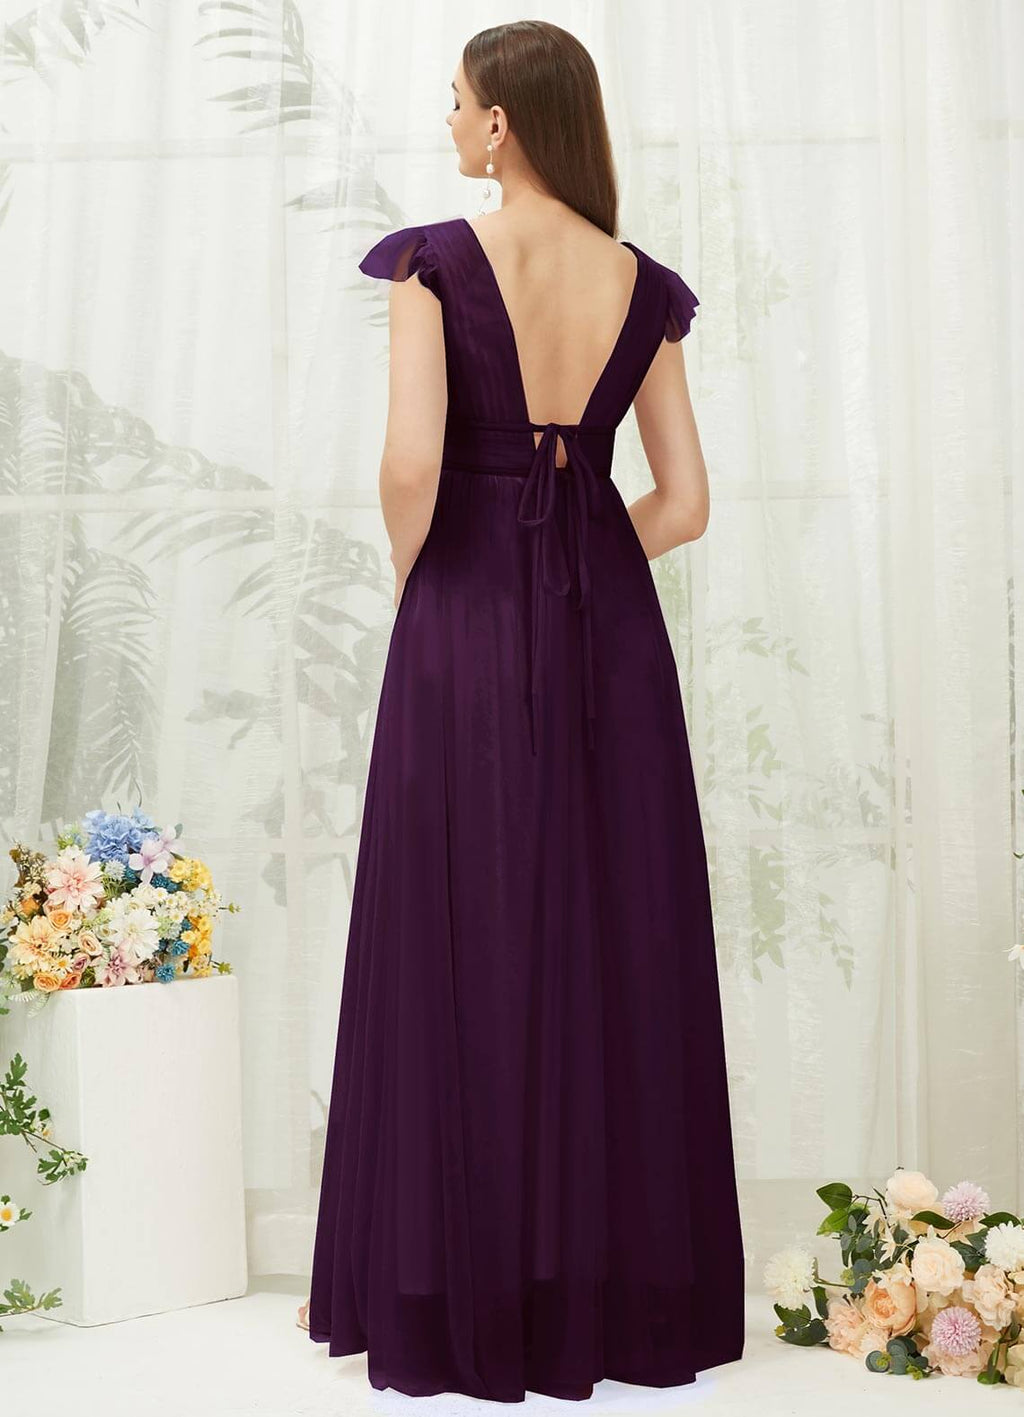 NZ Bridal Plum Tulle Maxi Backless bridesmaid dresses R0410 Collins a